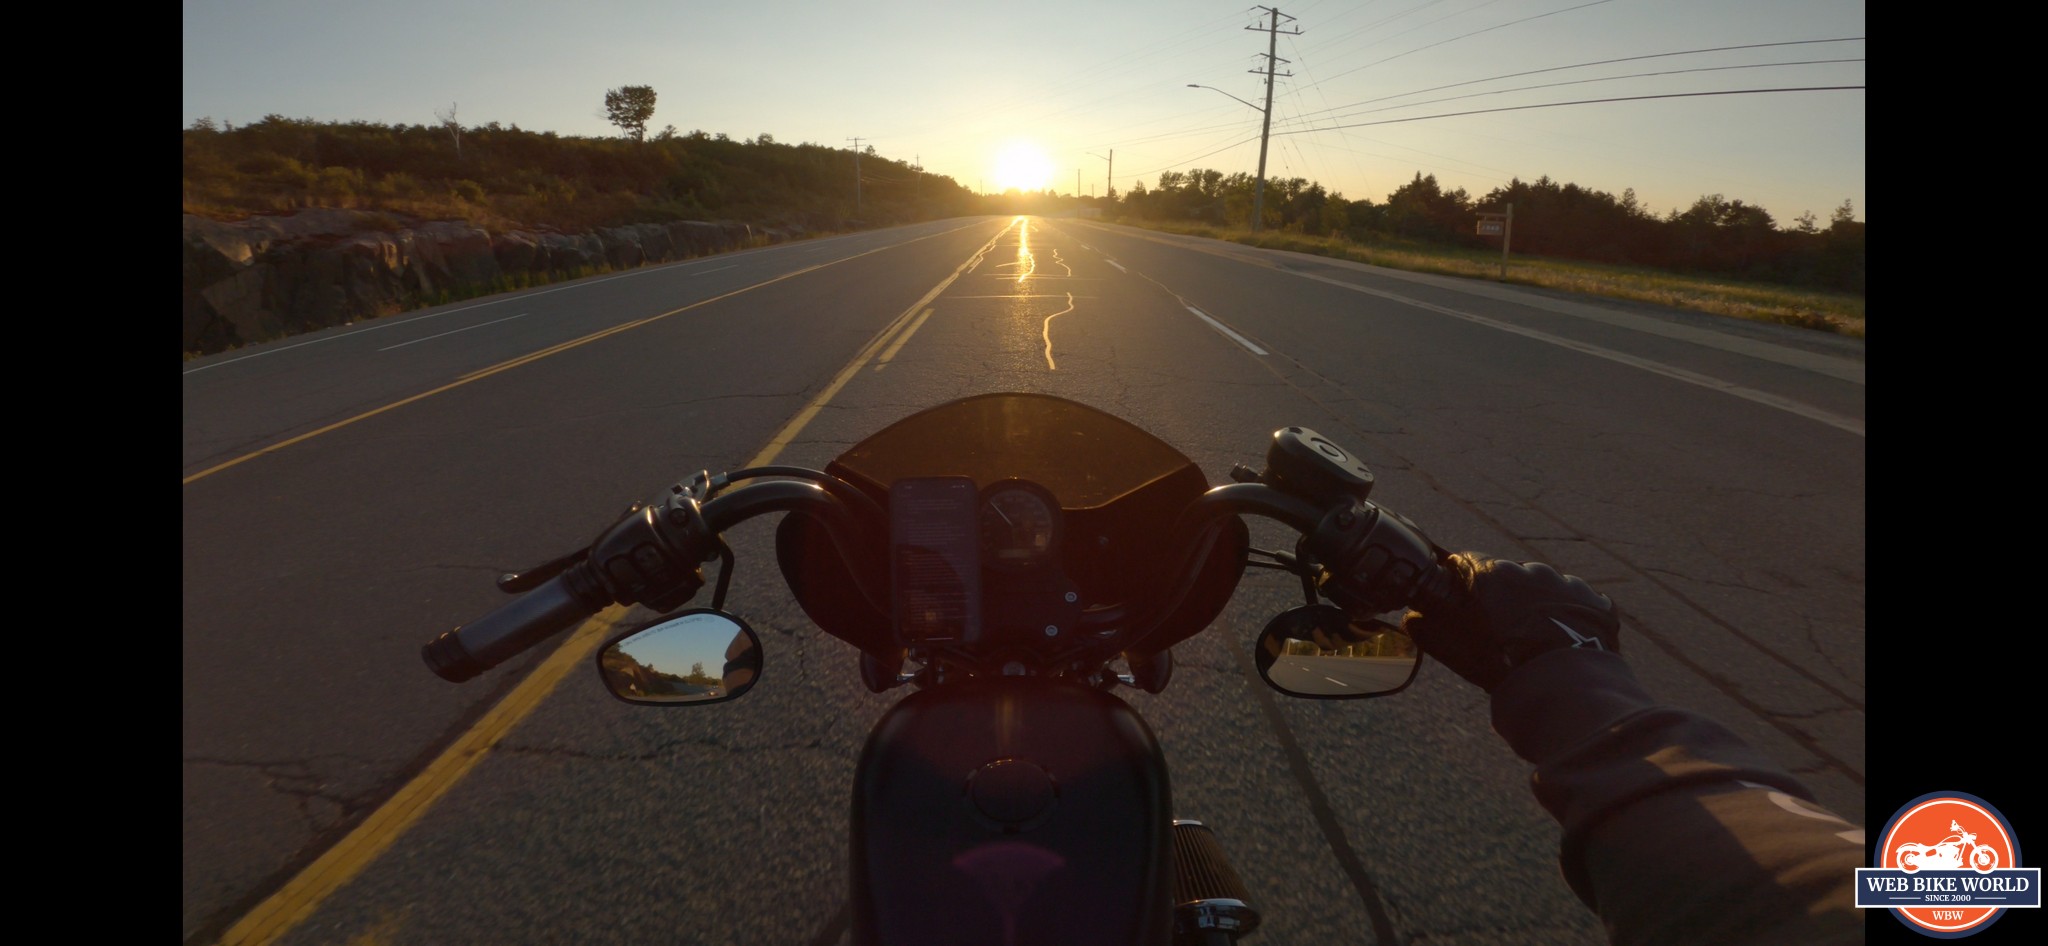 POV view of riding a motorcycle